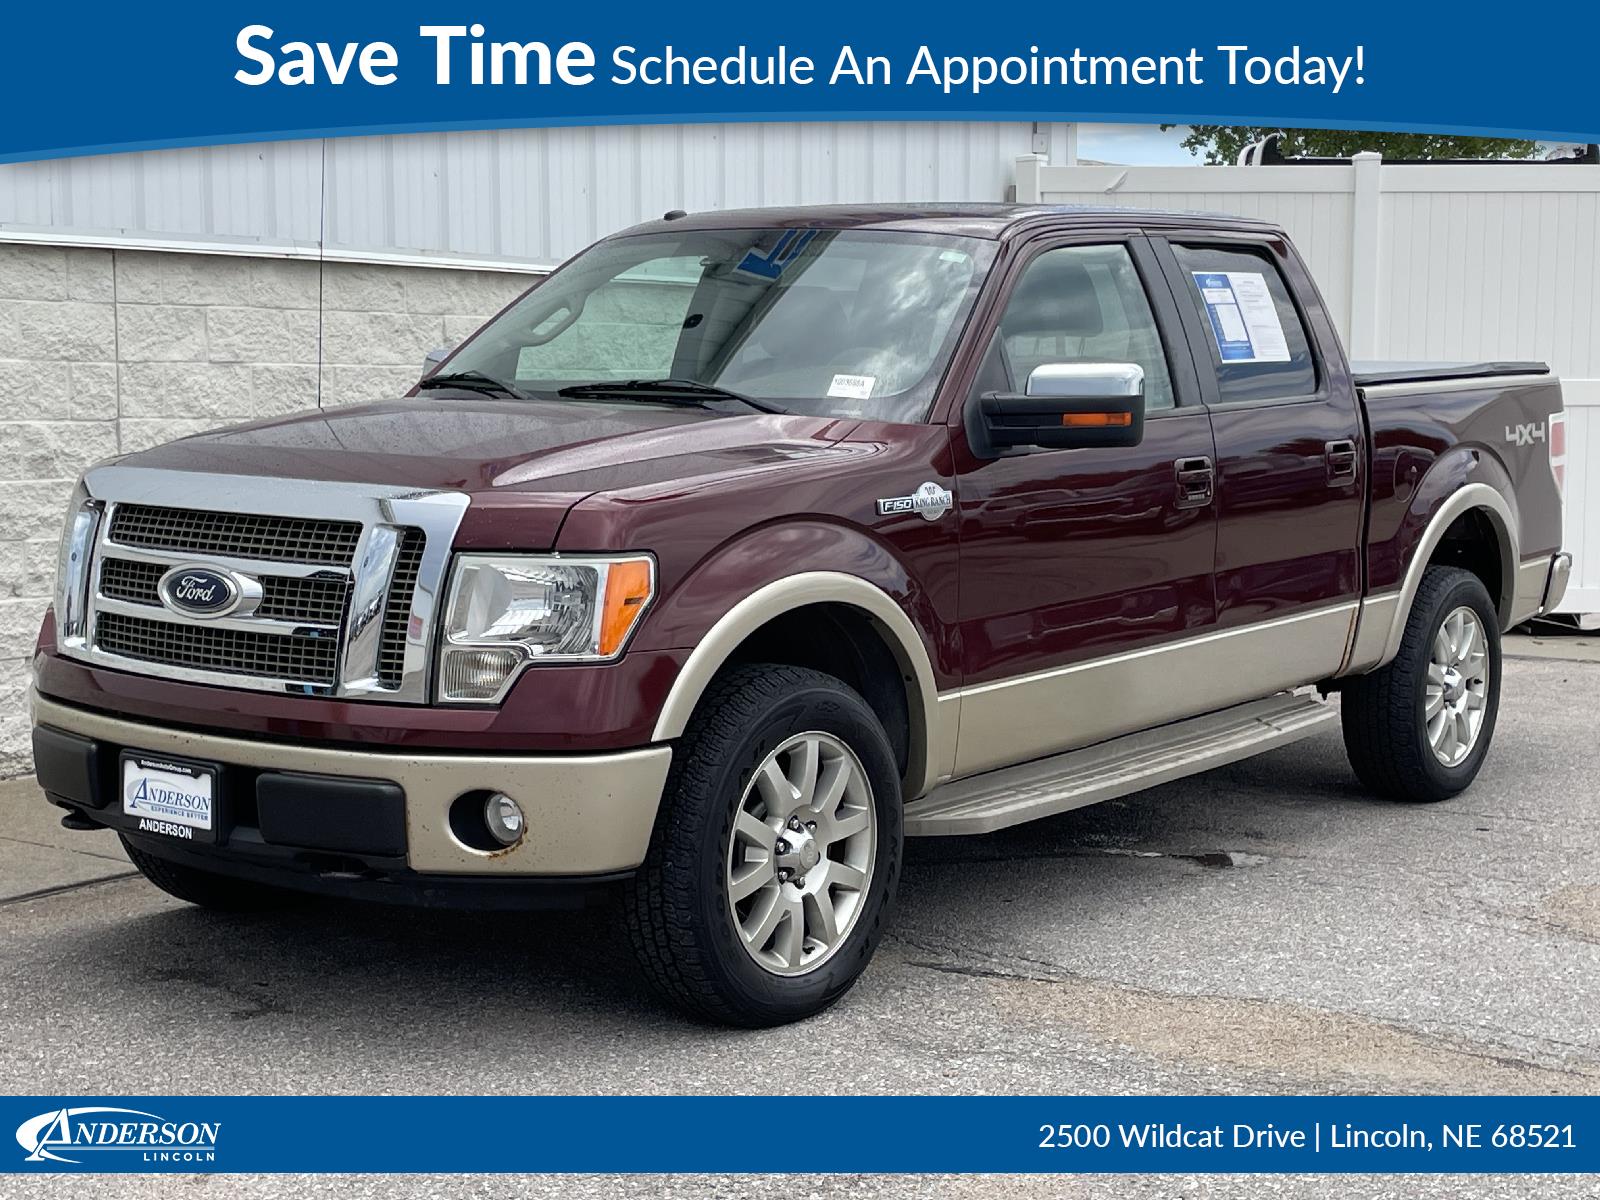 Used 2009 Ford F-150 King Ranch Stock: 1003688A